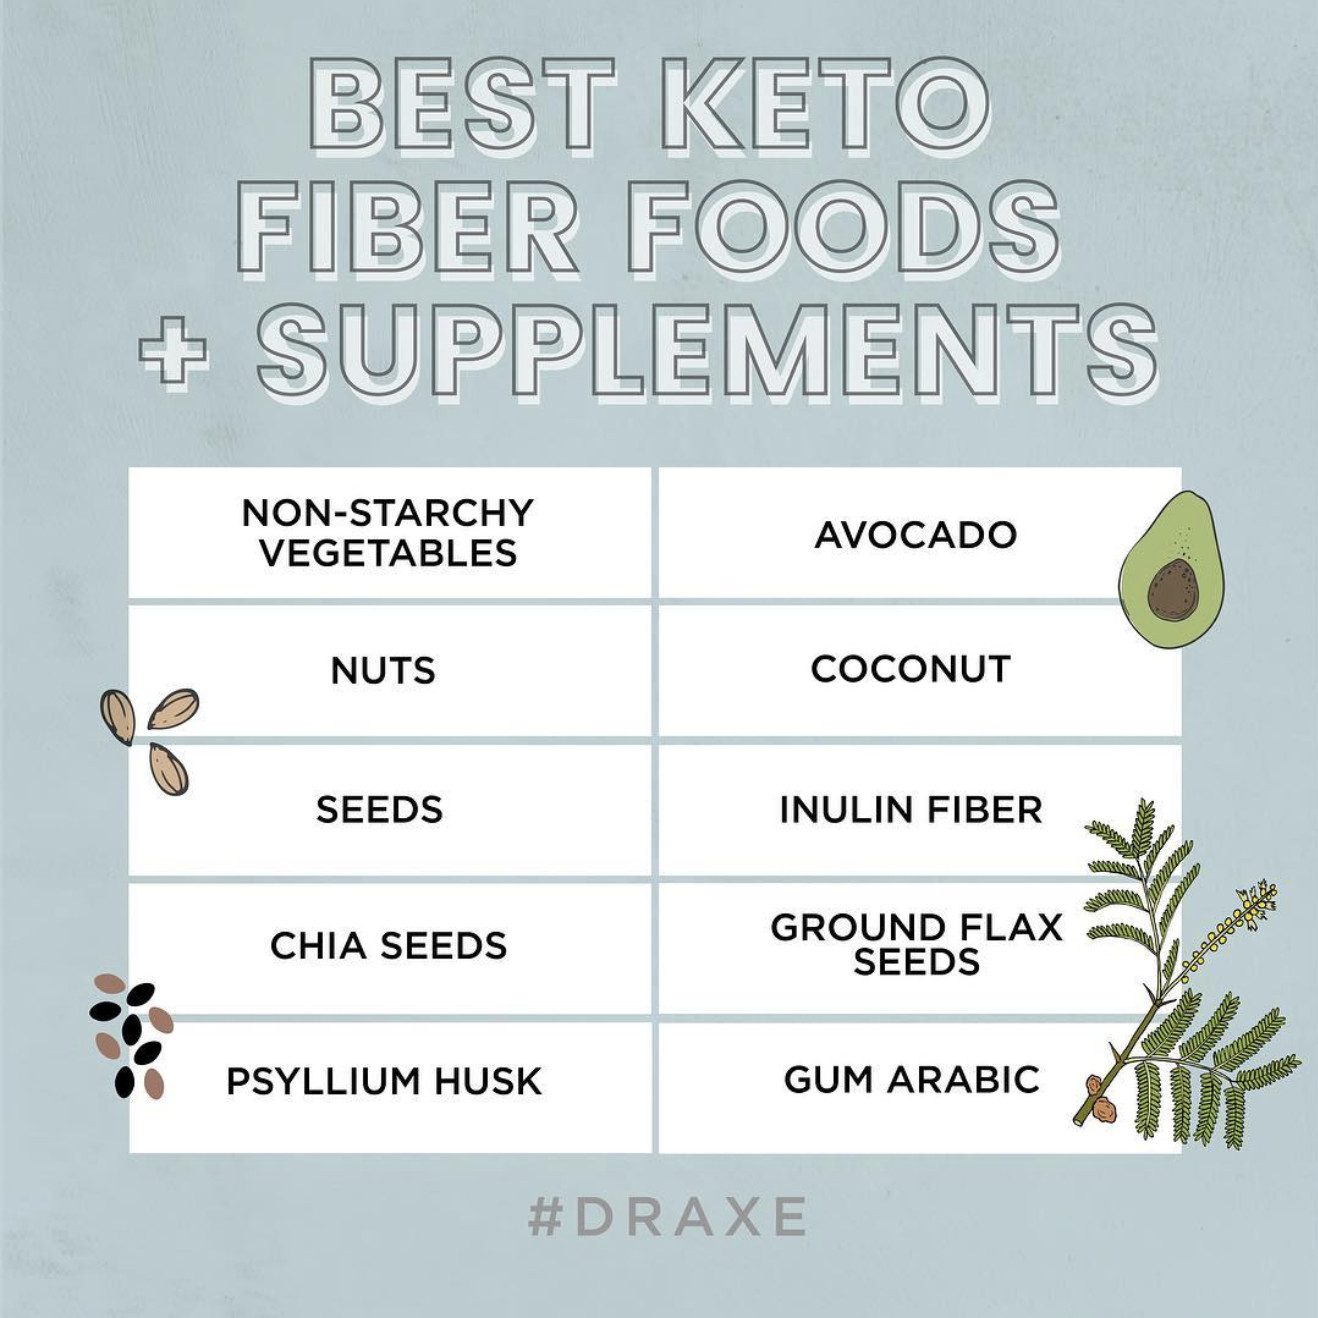 Josh Axe Keto Diet Recipes
 Best High Fiber Keto Foods and Why You Need Them